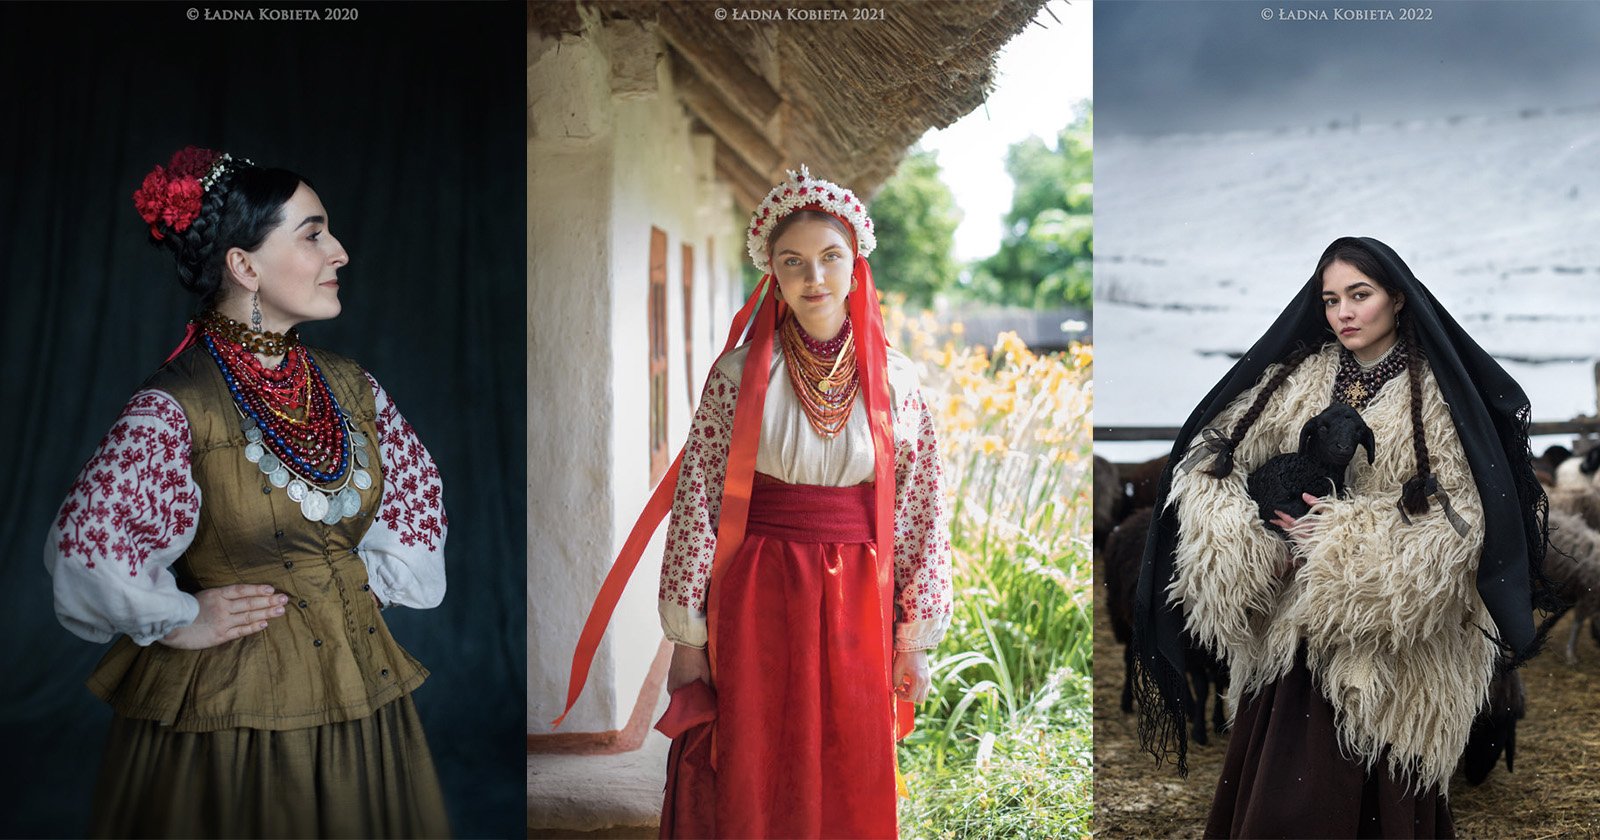 Ukrainian Photographer’s Ethnic Pictures Depict What’s at Stake